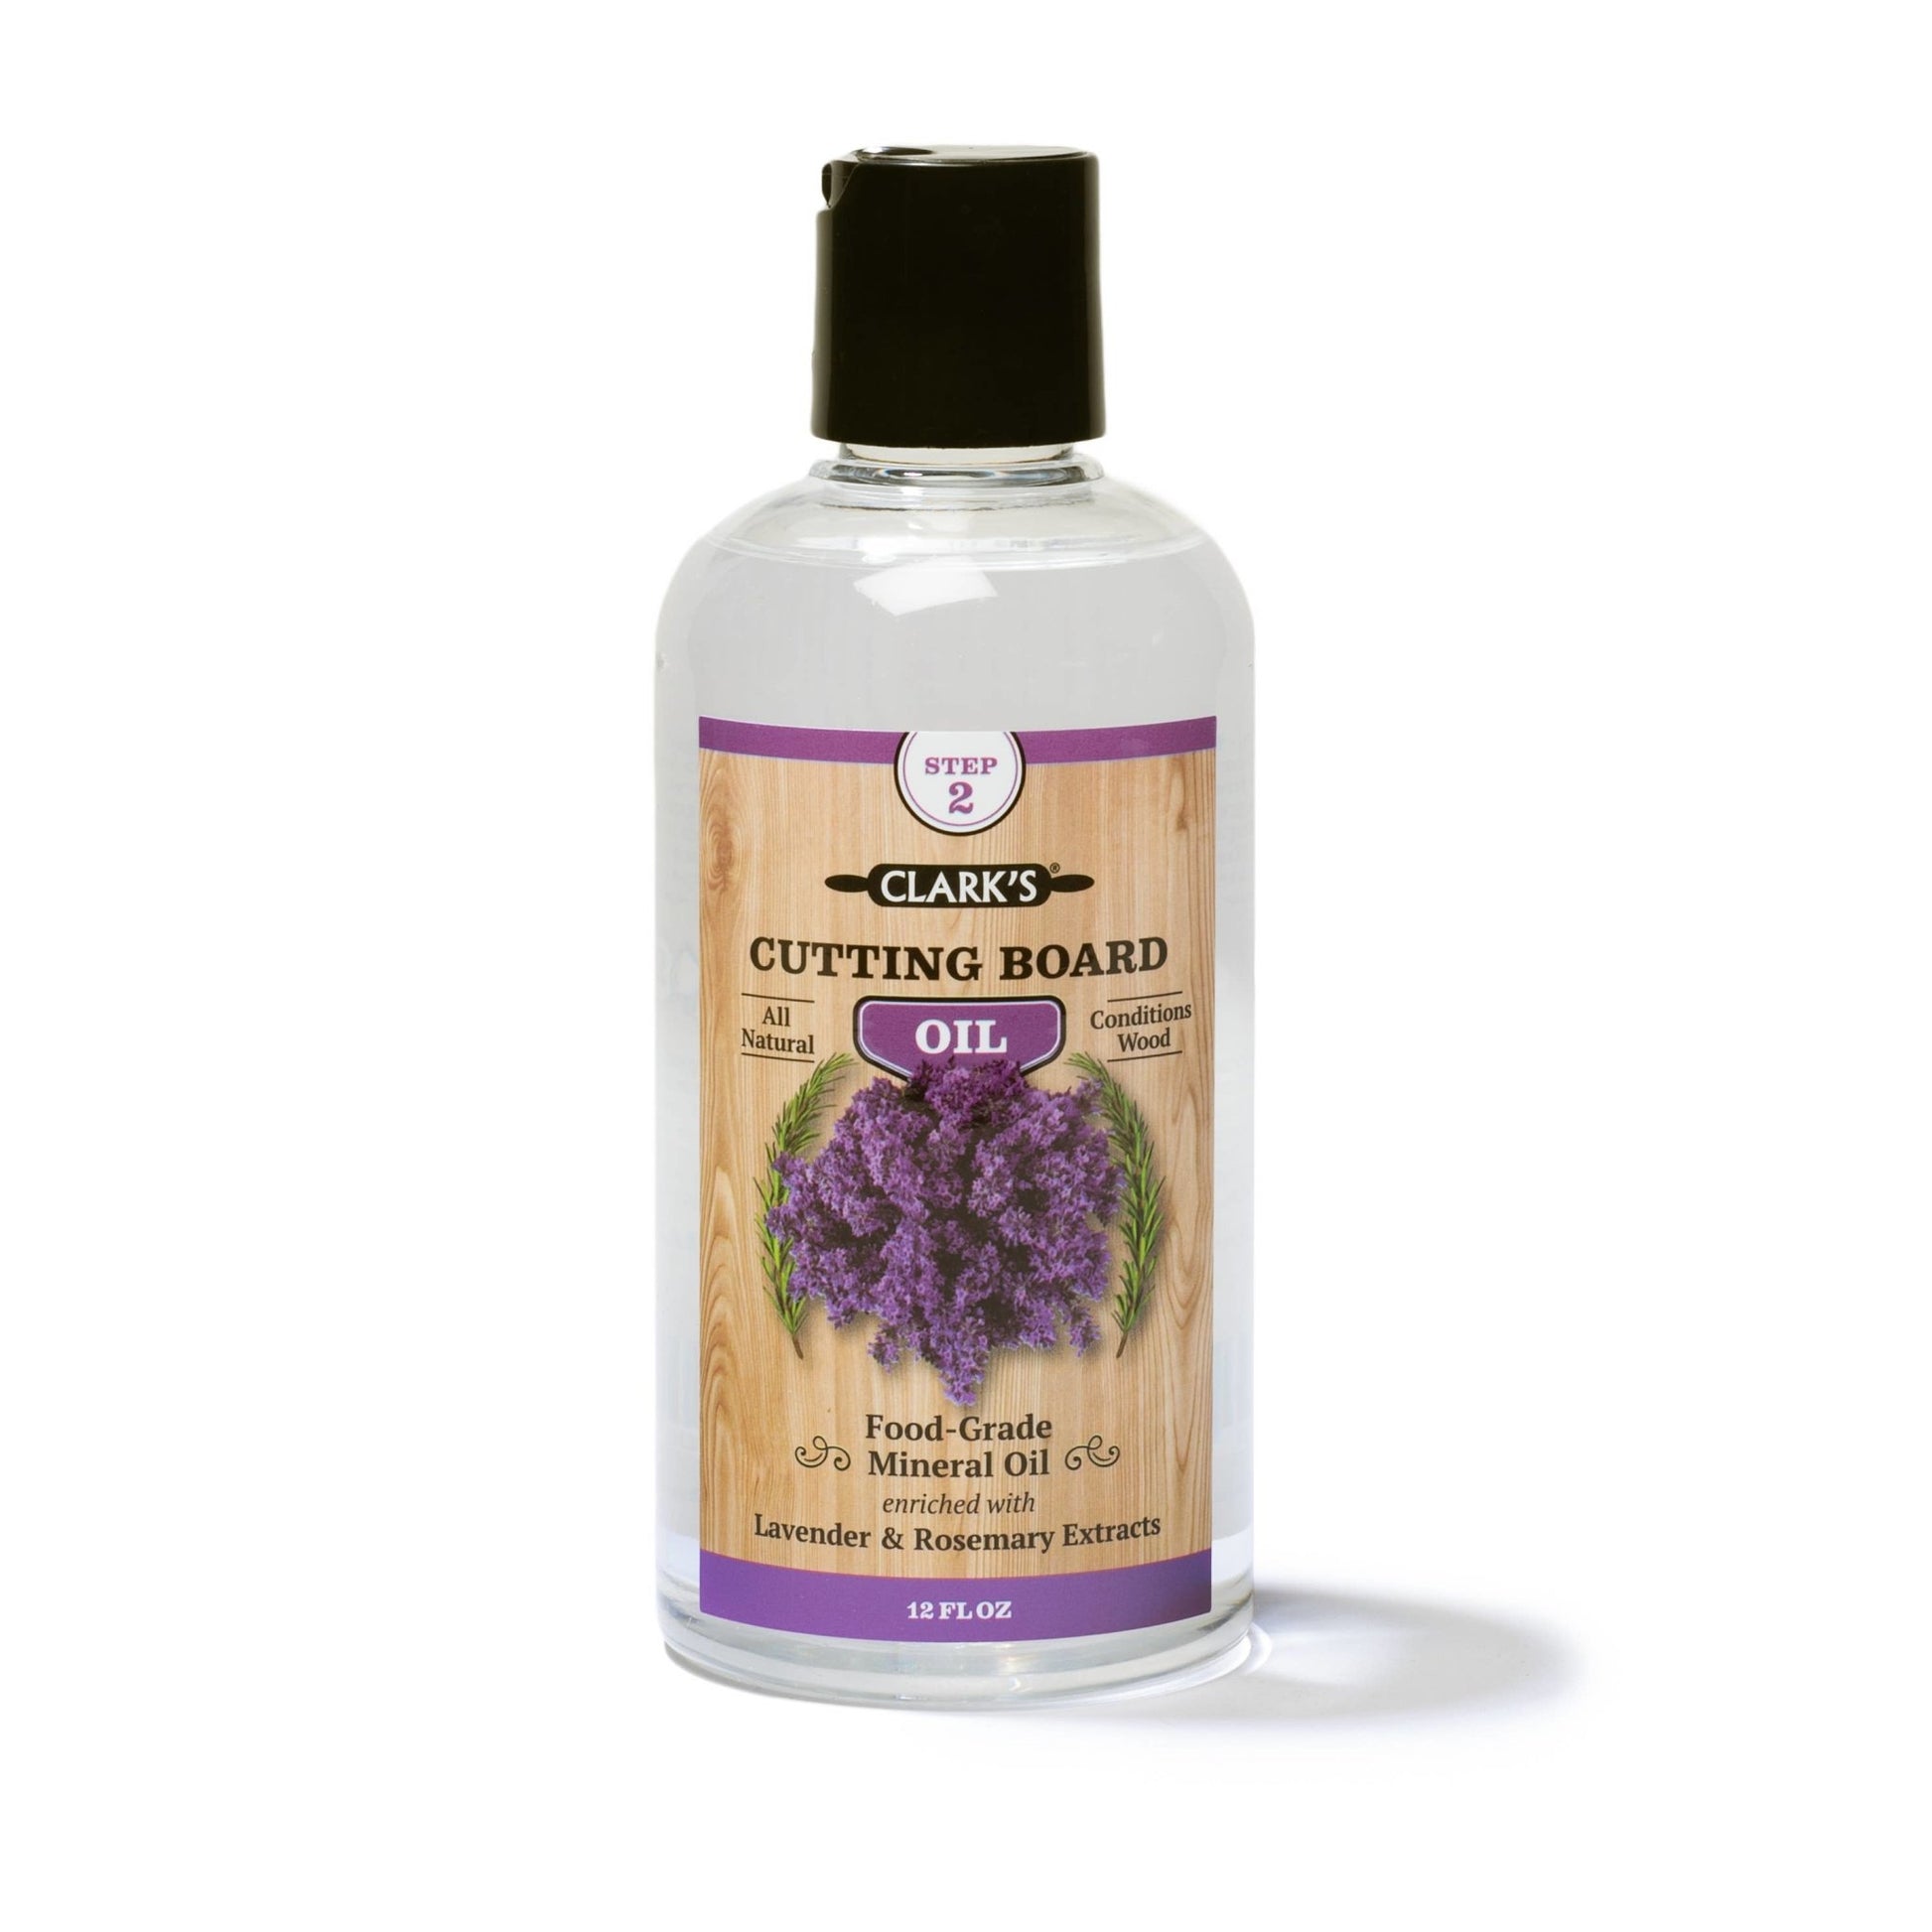 Lavender & Rosemary Scented Cutting Board Oil - Fenwick & OliverLavender & Rosemary Scented Cutting Board OilCutting Board OilCLARK'SFenwick & Oliver853324008159